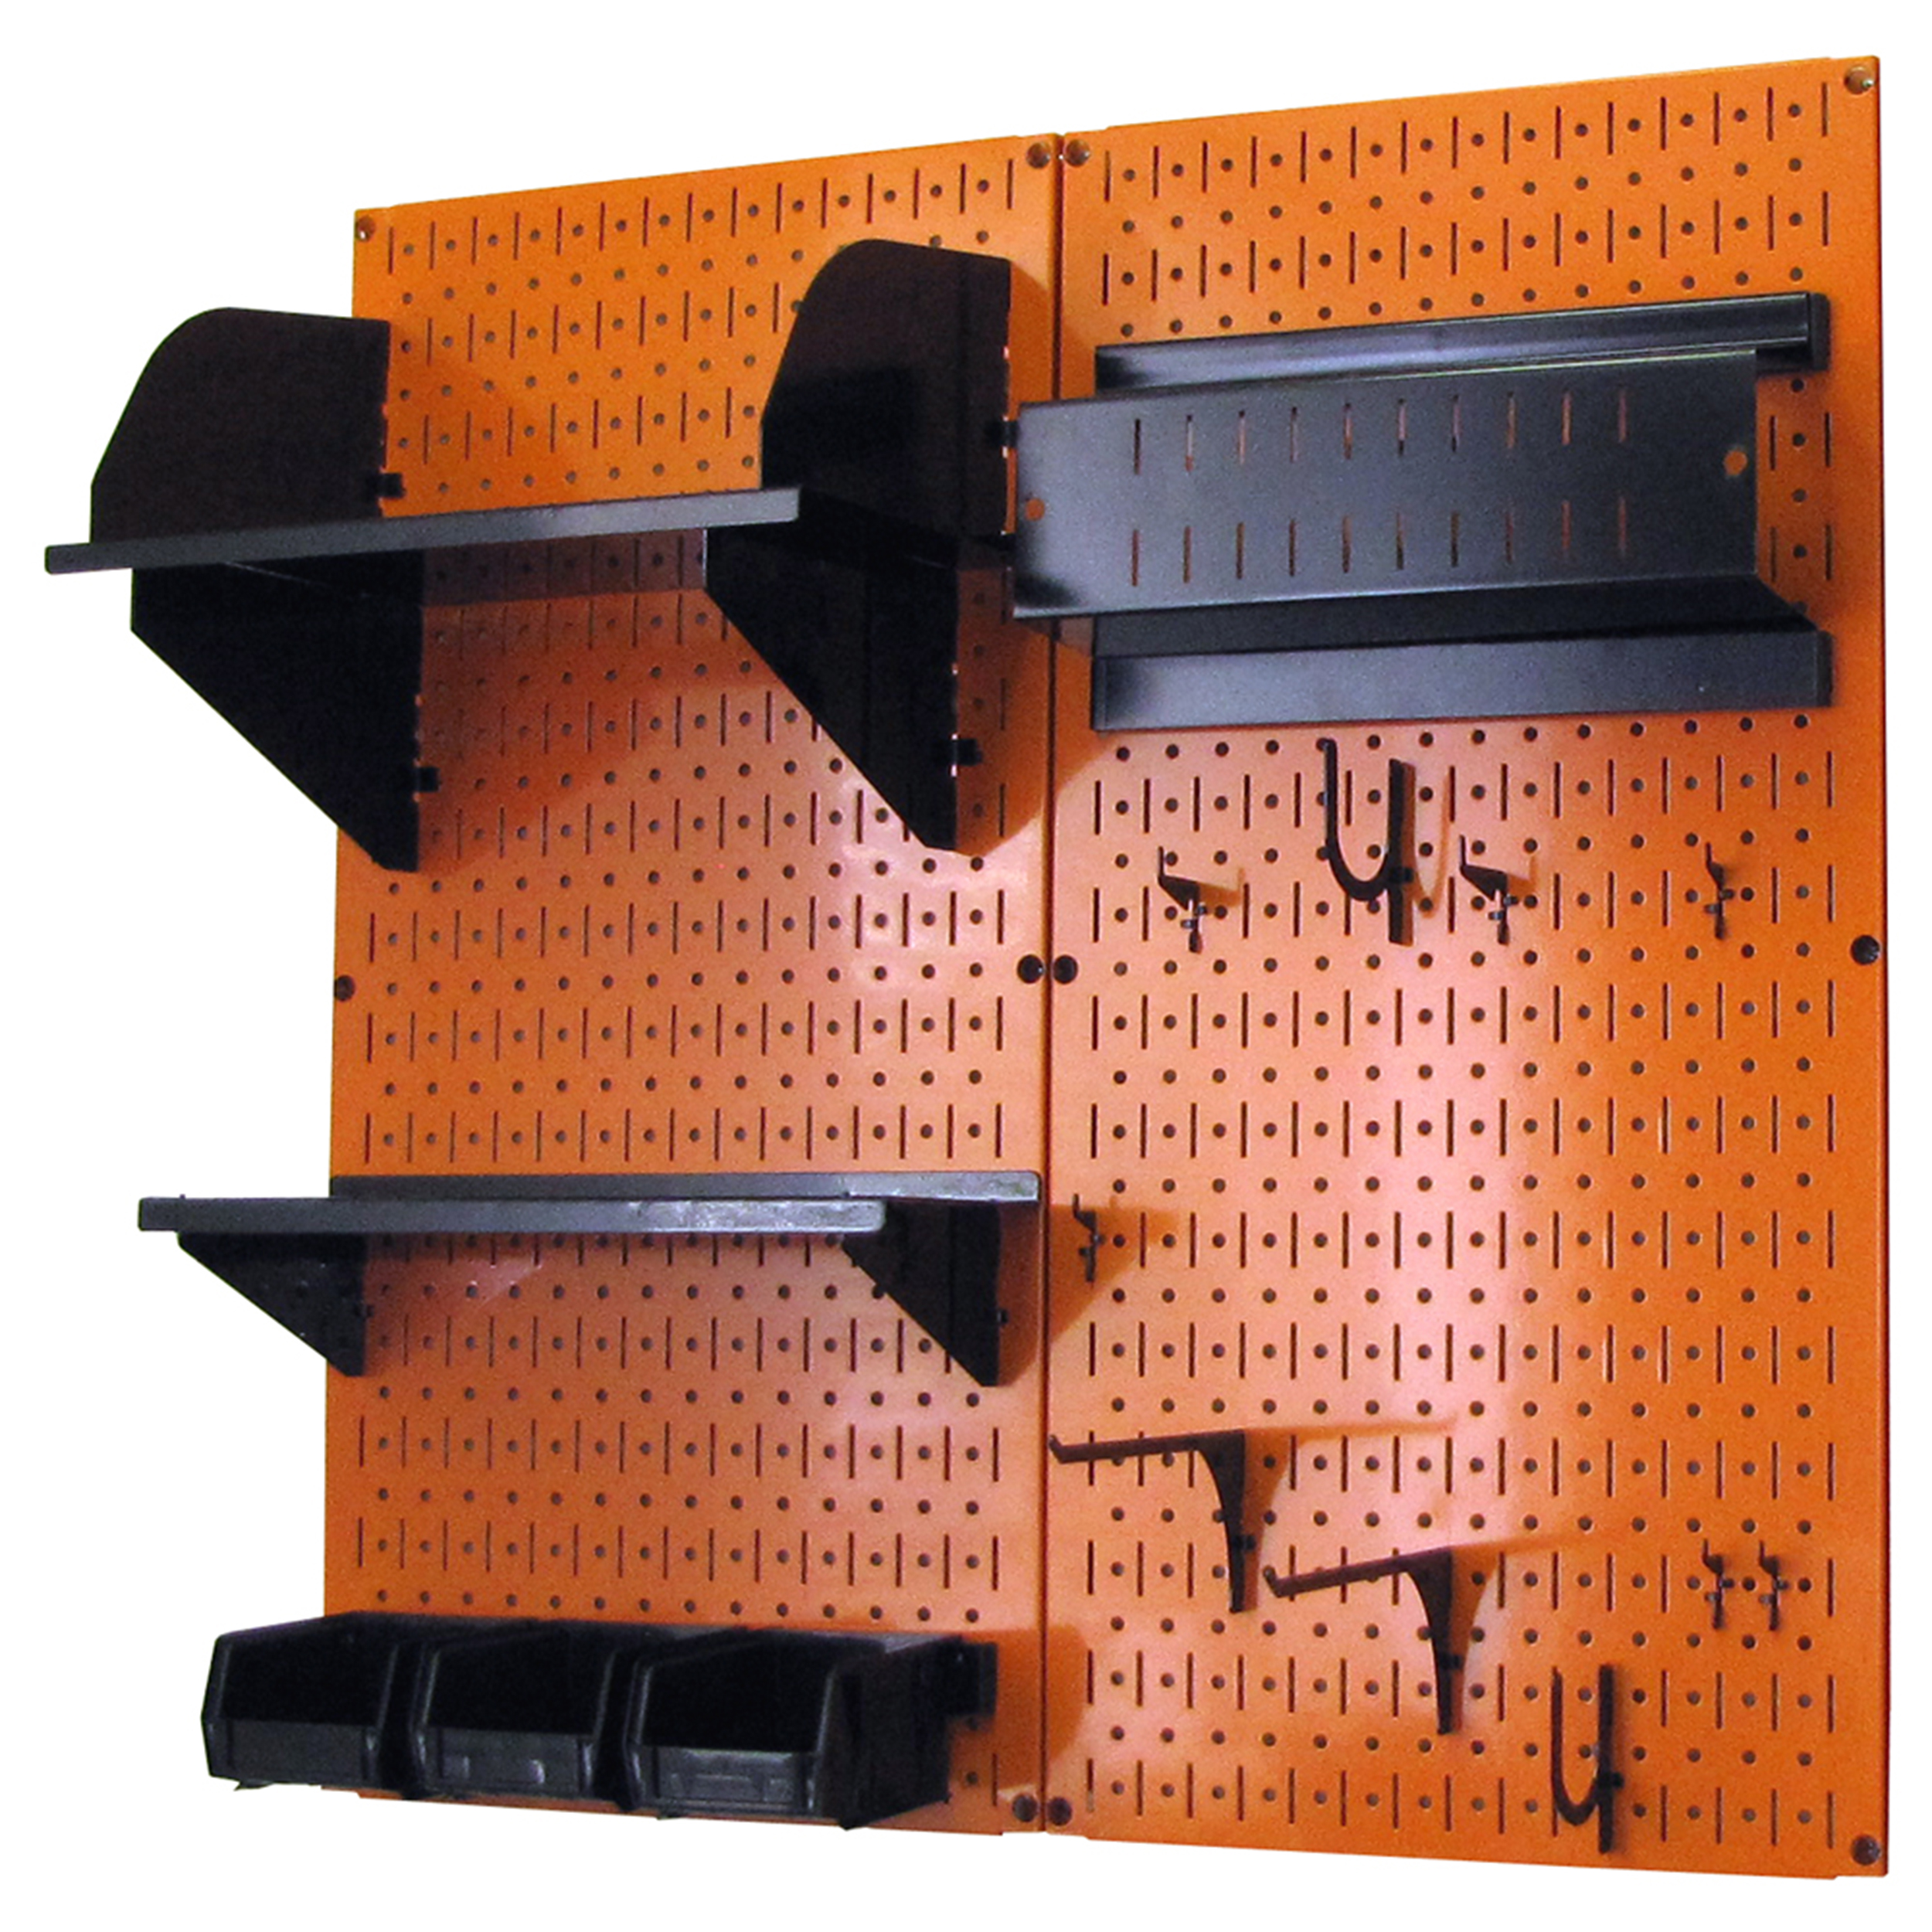 Pegboard Hobby Craft Pegboard Organizer Storage Kit With Orange Pegboard And Black Accessories